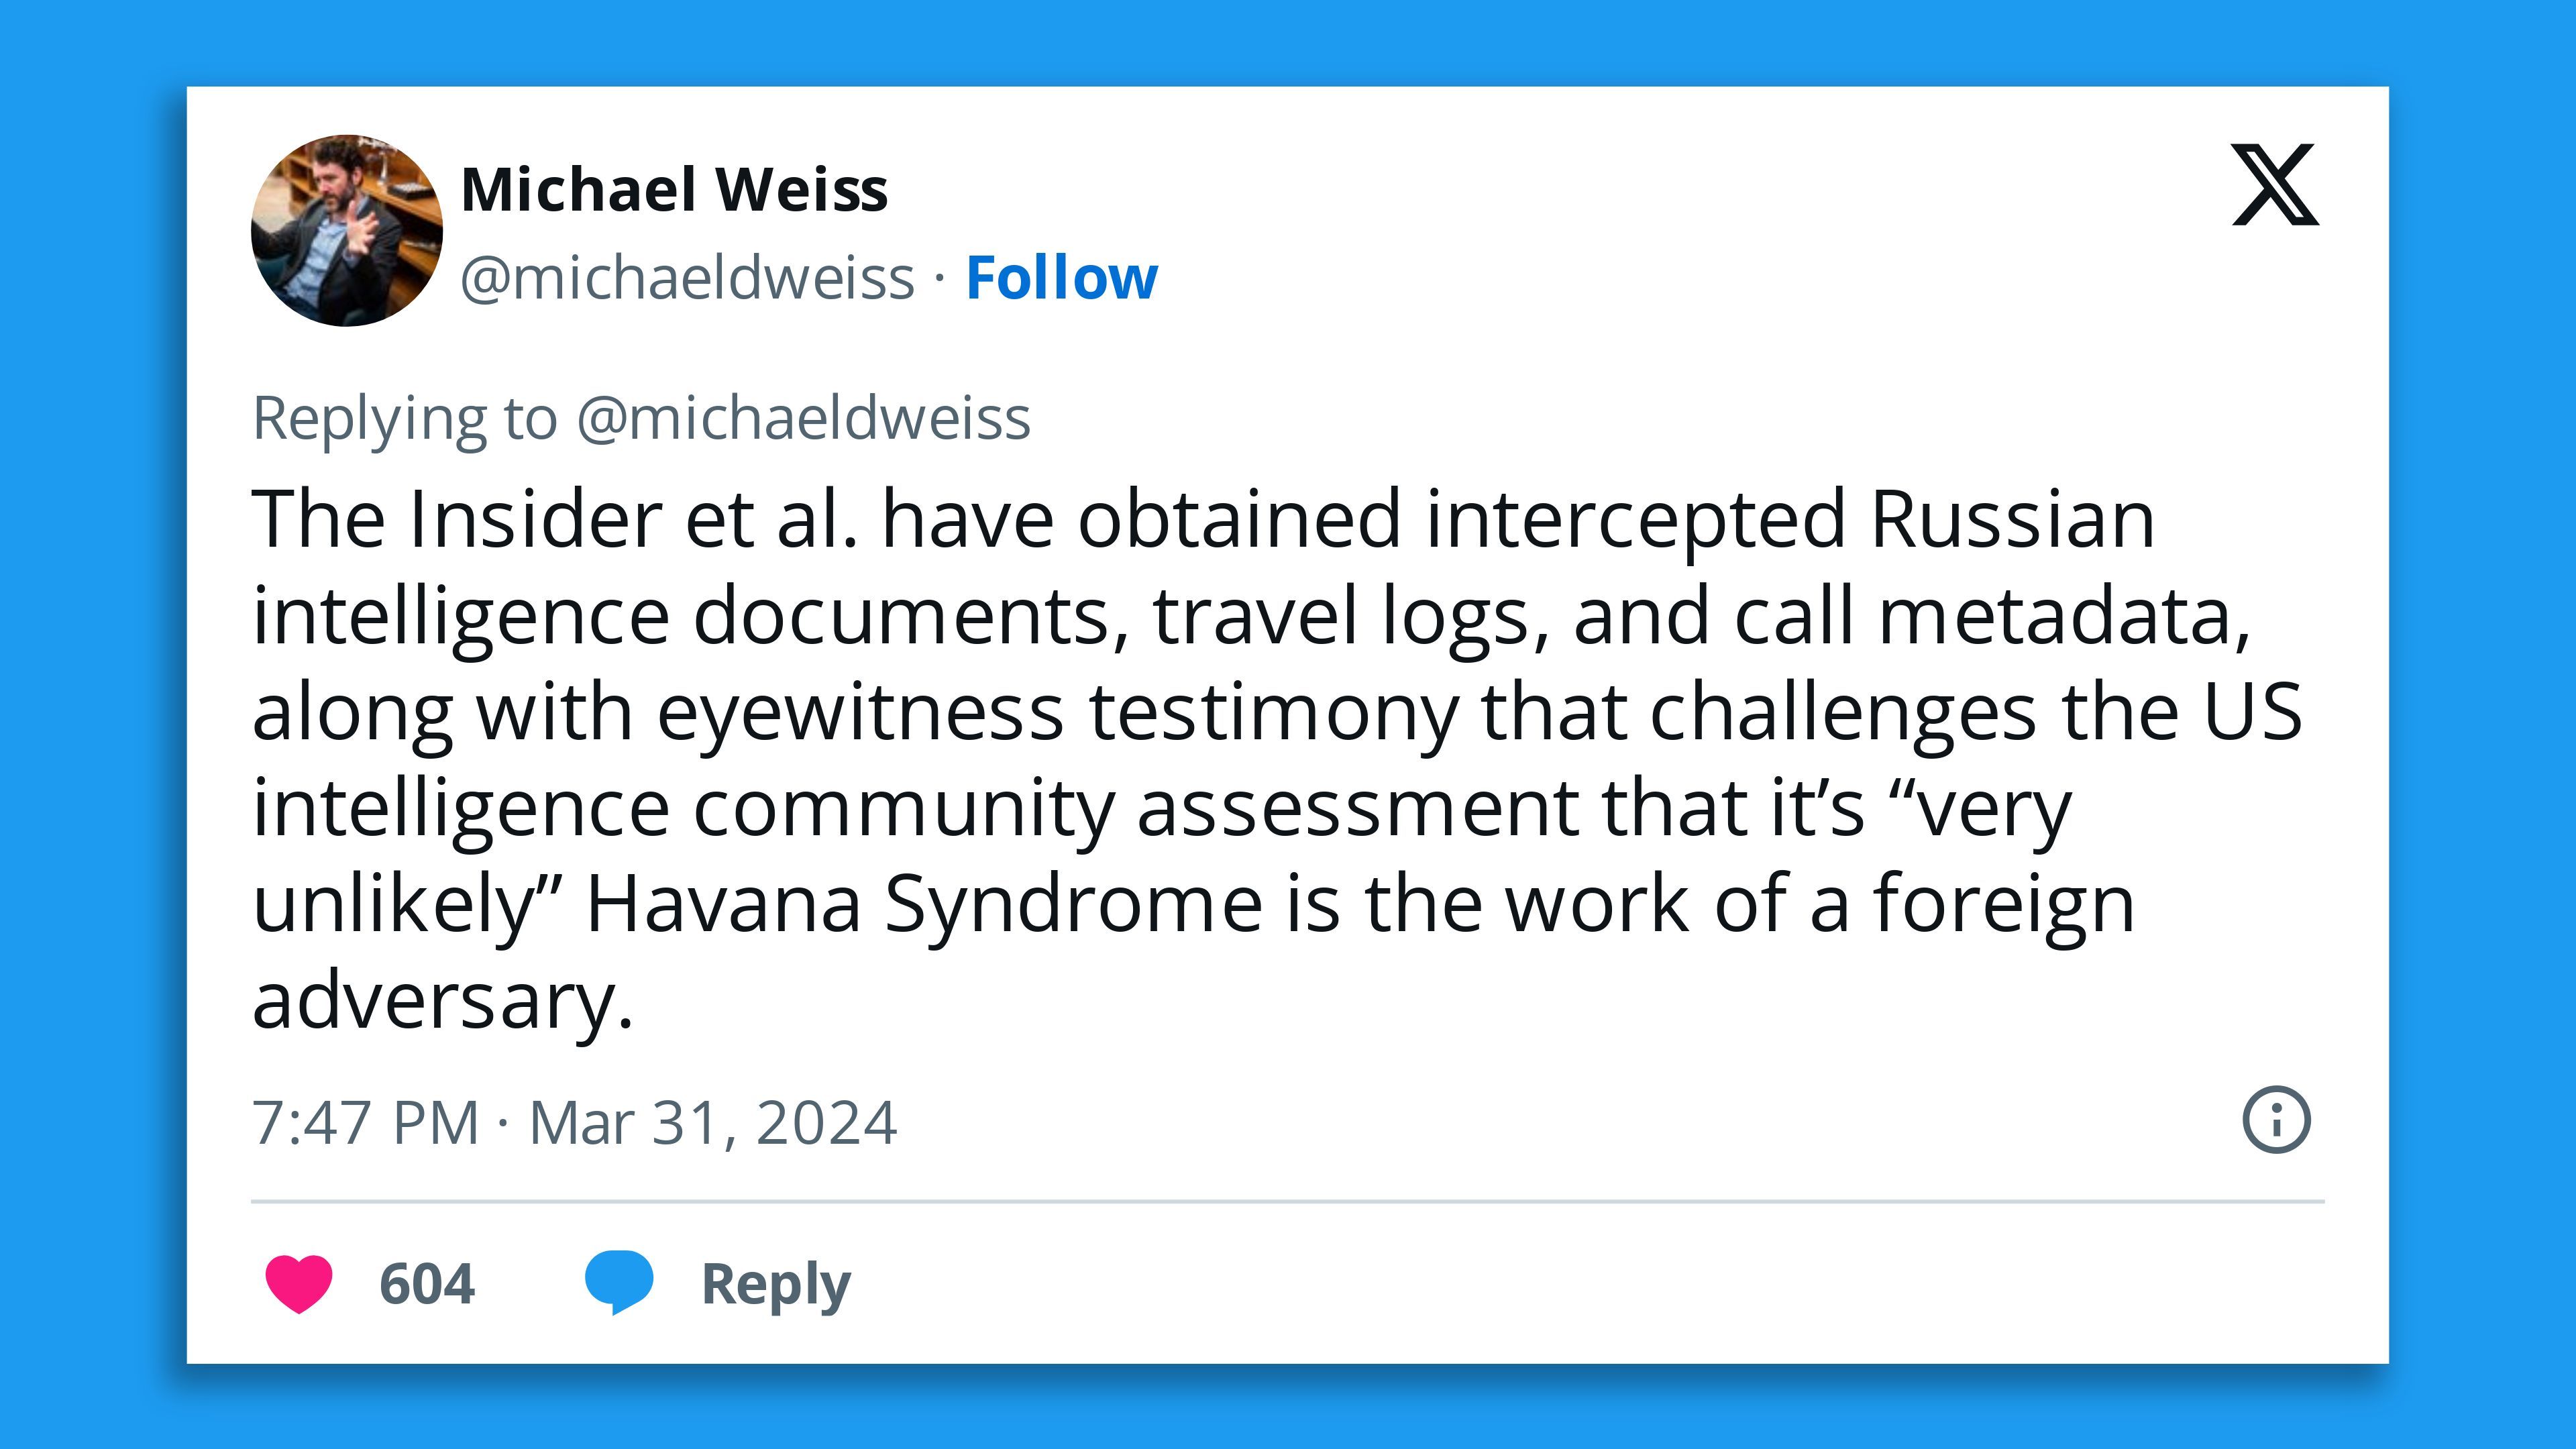 A screenshot of a tweet by The Insider editor Michael Weiss, saying: "The Insider et al. have obtained intercepted Russian intelligence documents, travel logs, and call metadata, along with eyewitness testimony that challenges the US intelligence community assessment that it’s “very unlikely” Havana Syndrome is the work of a foreign adversary."